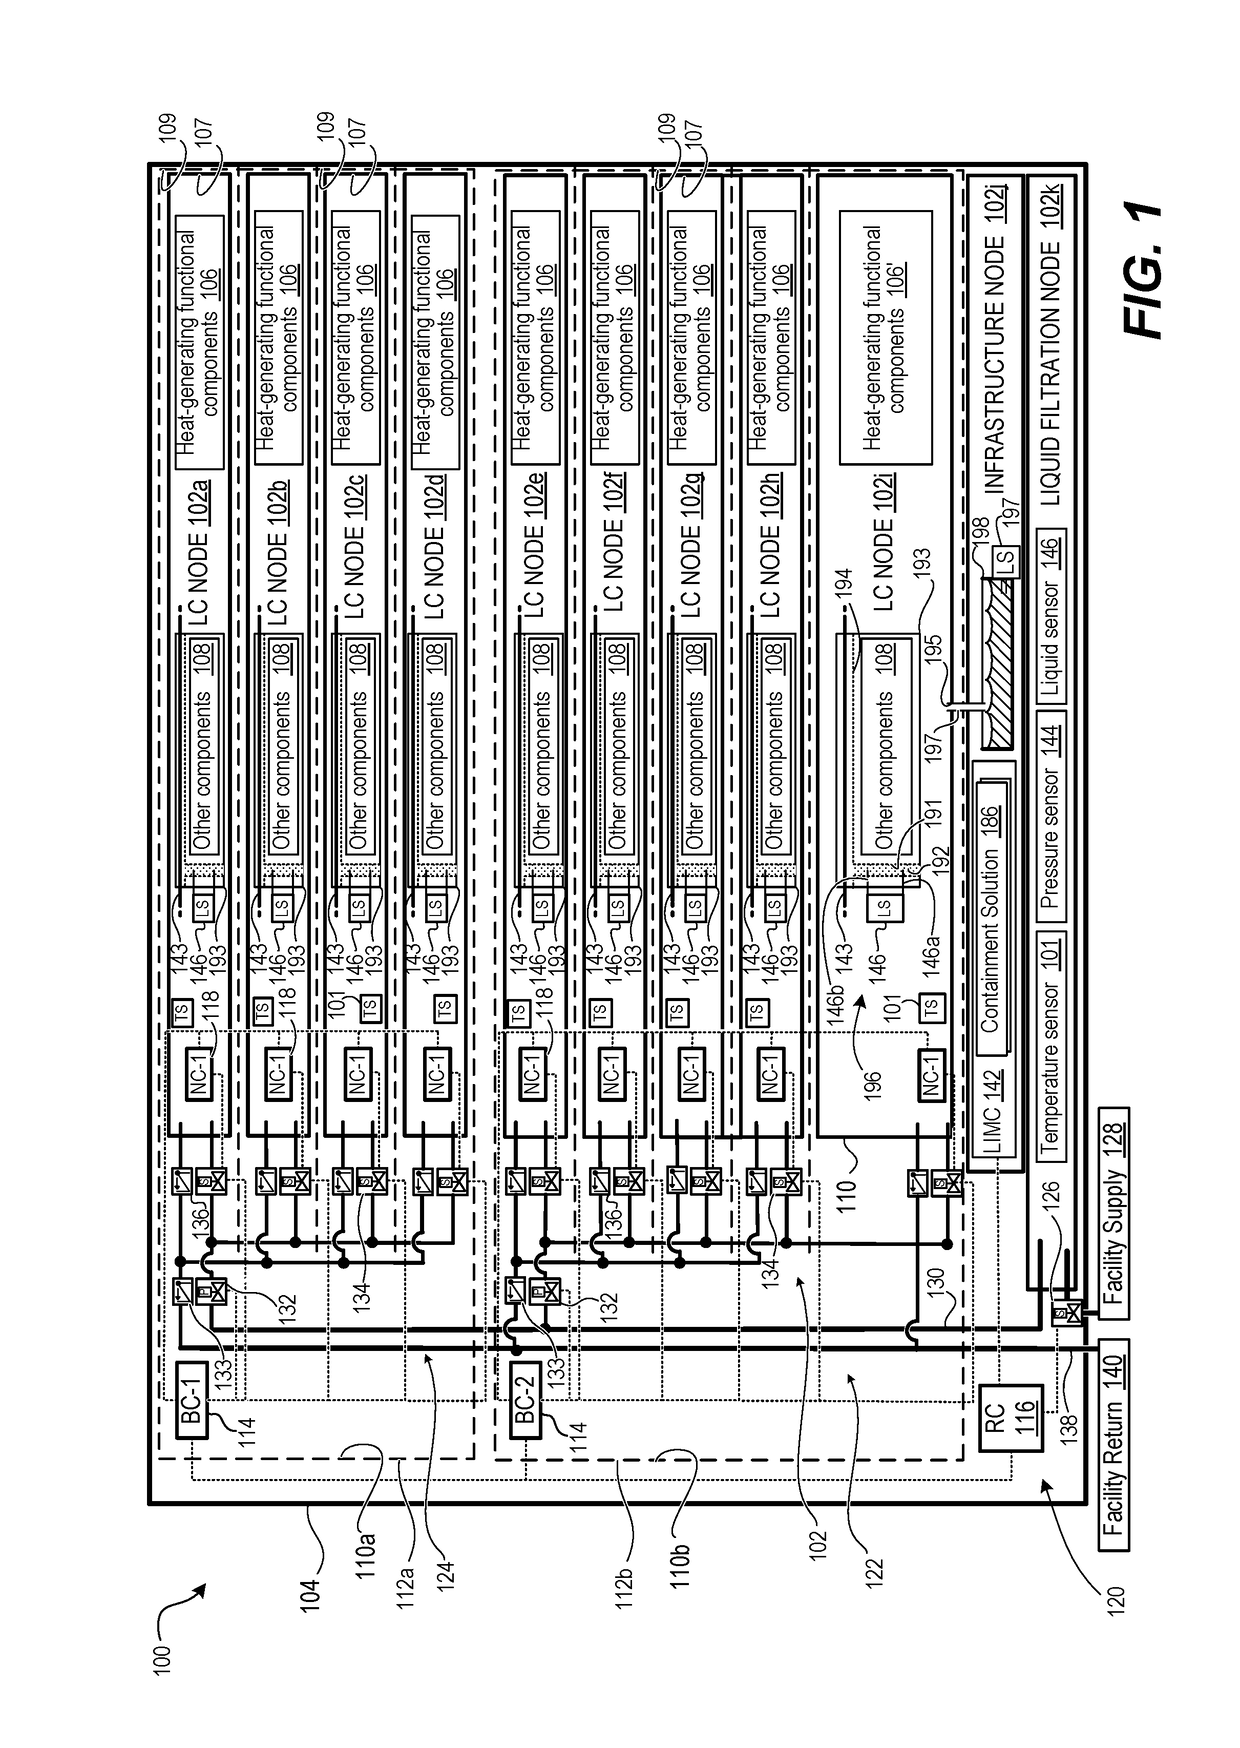 Liquid cooled rack information handling system having storage drive carrier for leak containment and vibration mitigation